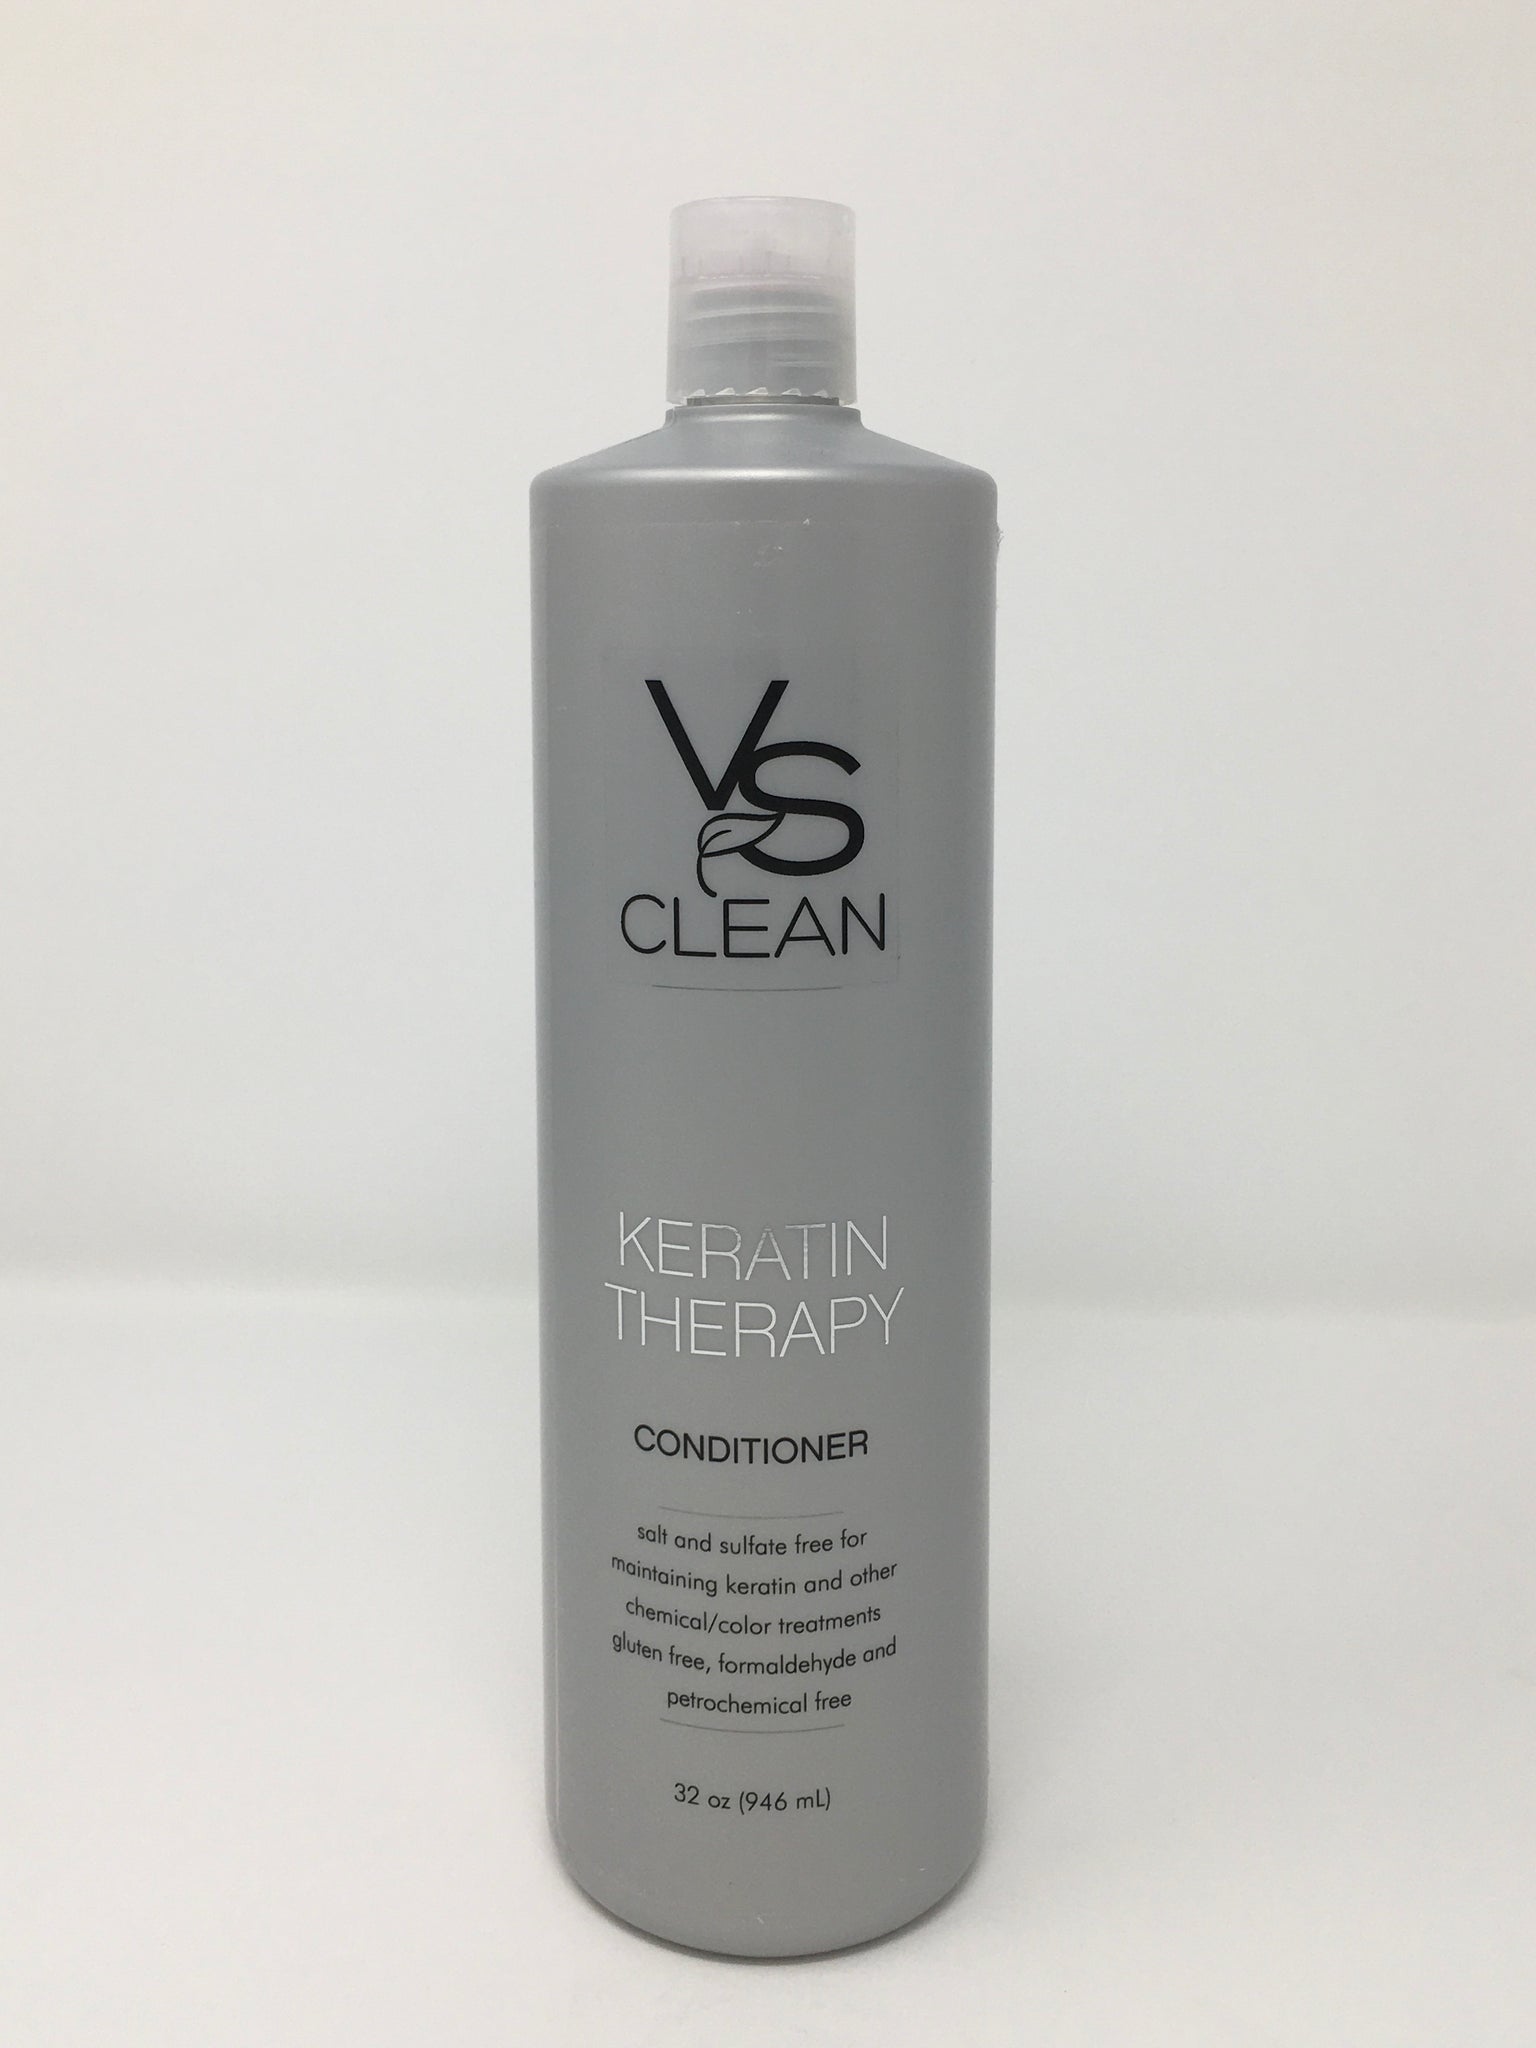 KERATIN THERAPY CONDITIONER